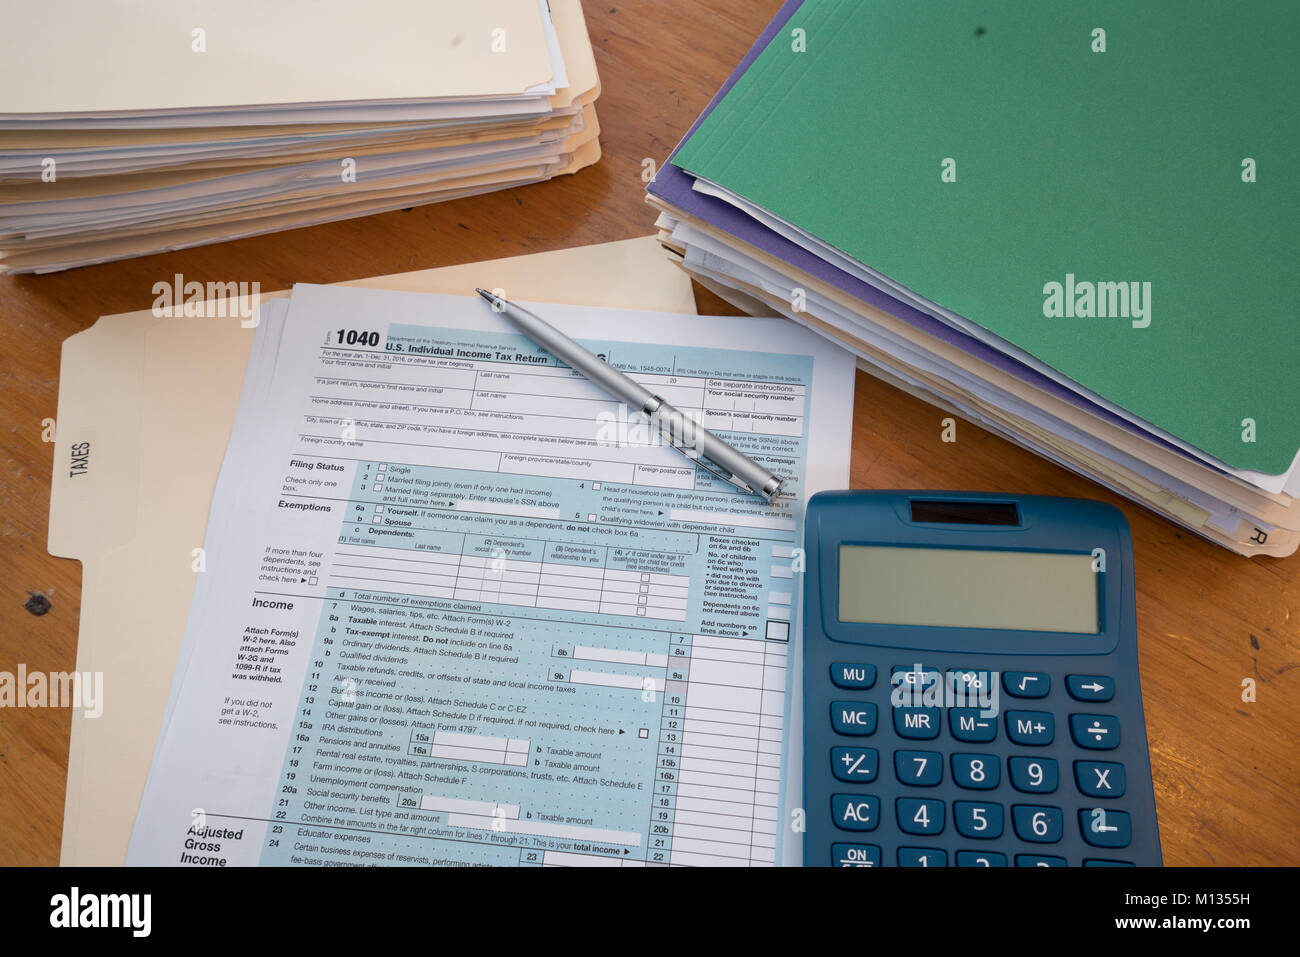 IRS Tax Form with tax records in Folders, Calculator and Pen Stock Photo